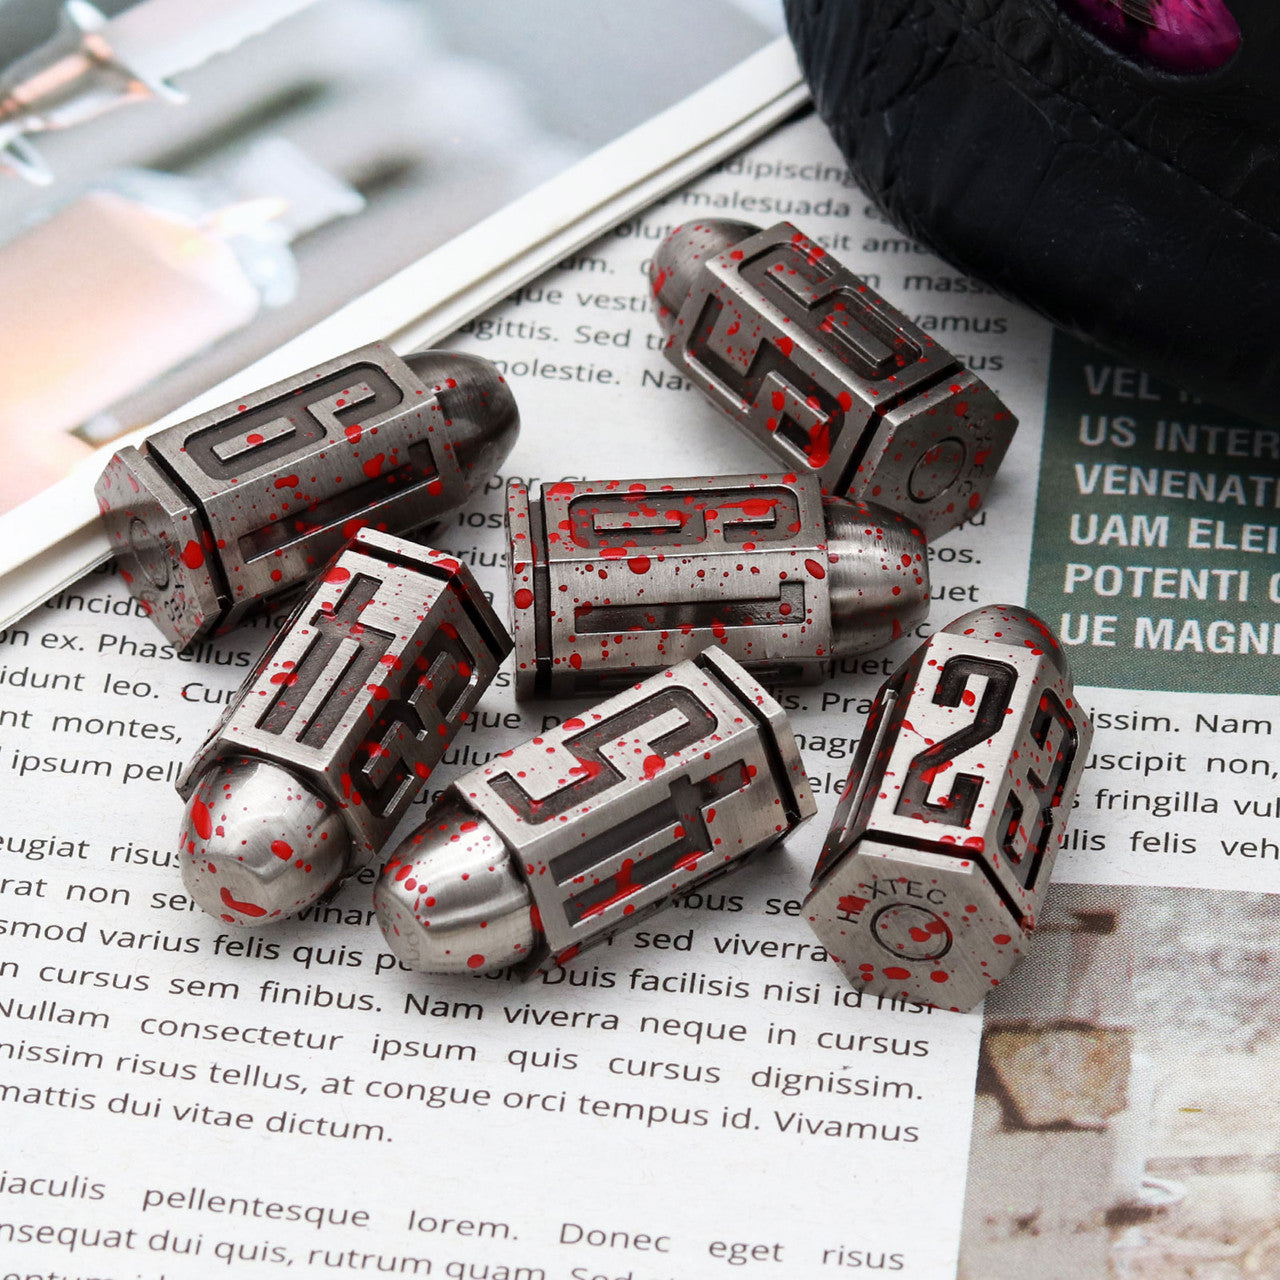 Haxtec Bloodstained Bullet Metal D6 Dice Set Unique Metal 6 Sided Dice for Dungoens and Dragons RPG Gifts-Bloodstained Antiue Iron